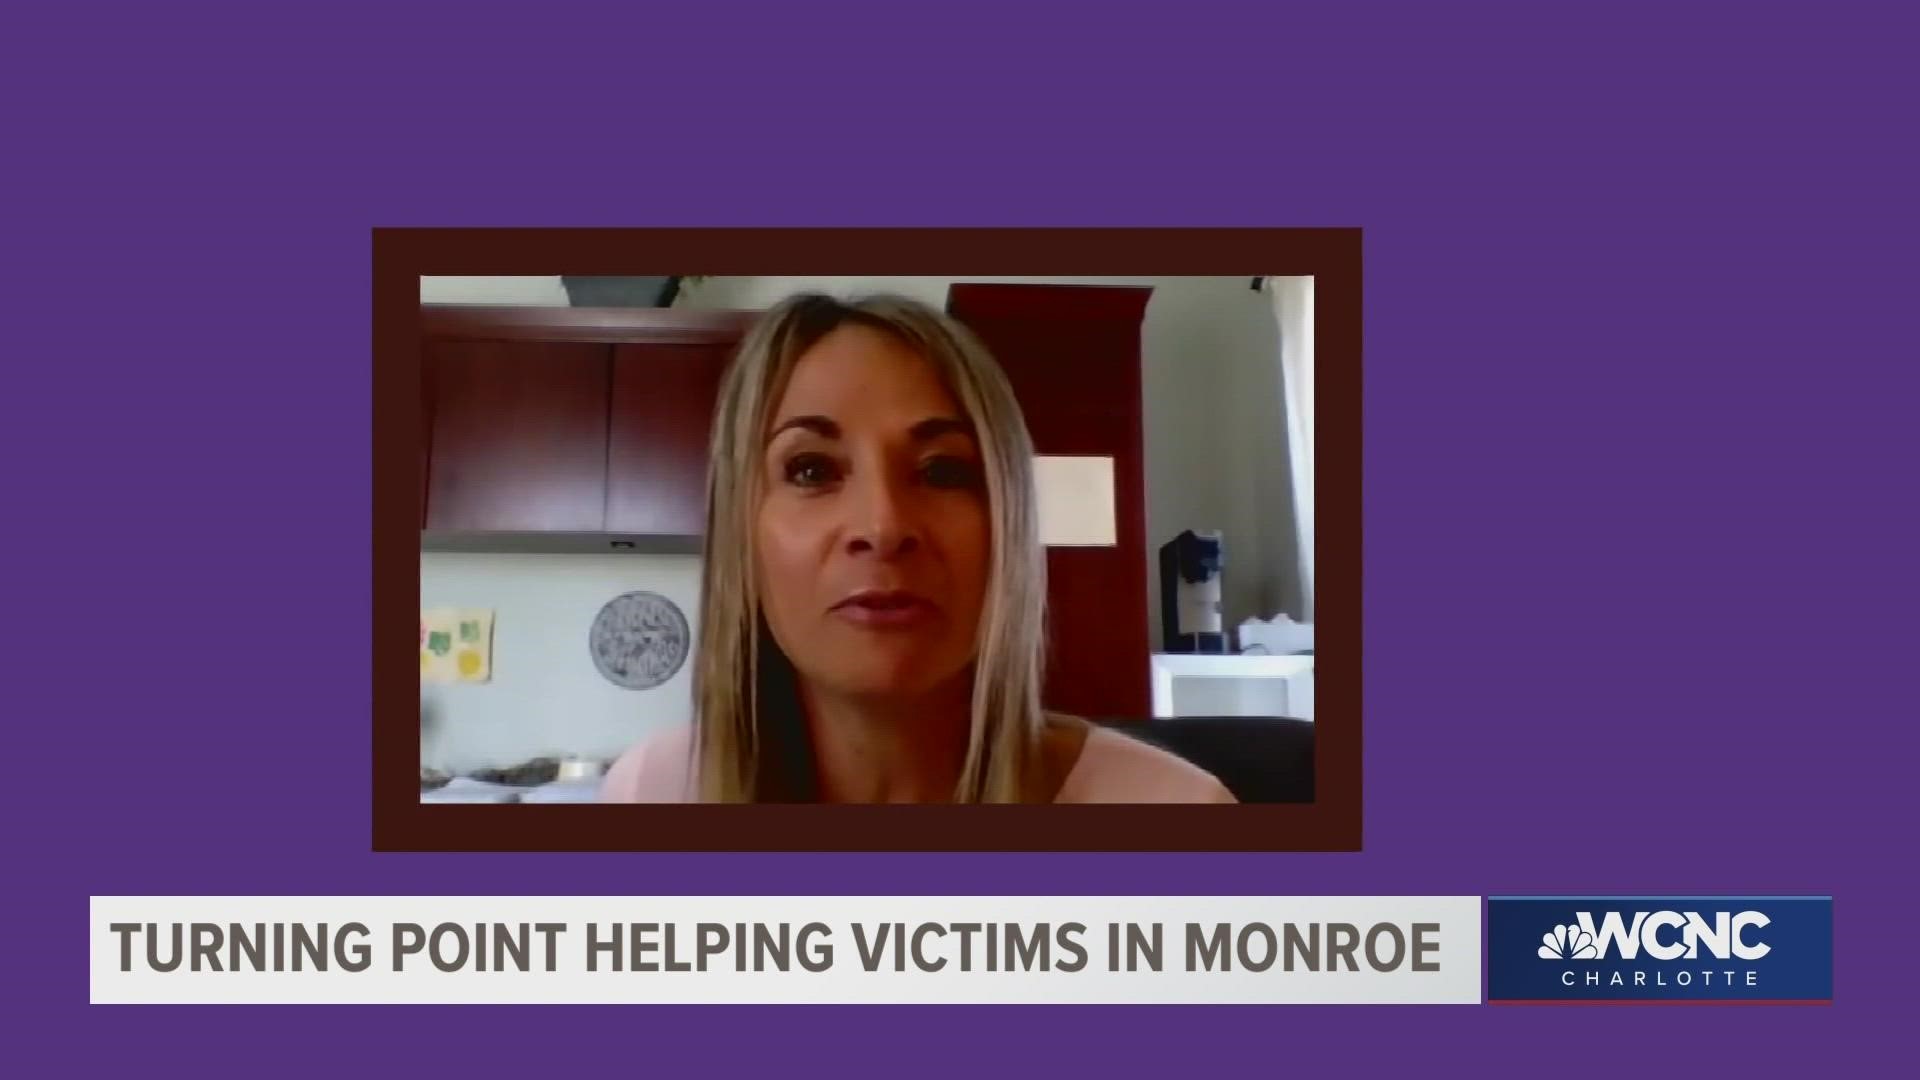 Monroe's Turning Point is making a difference in a community that desperately needs help.